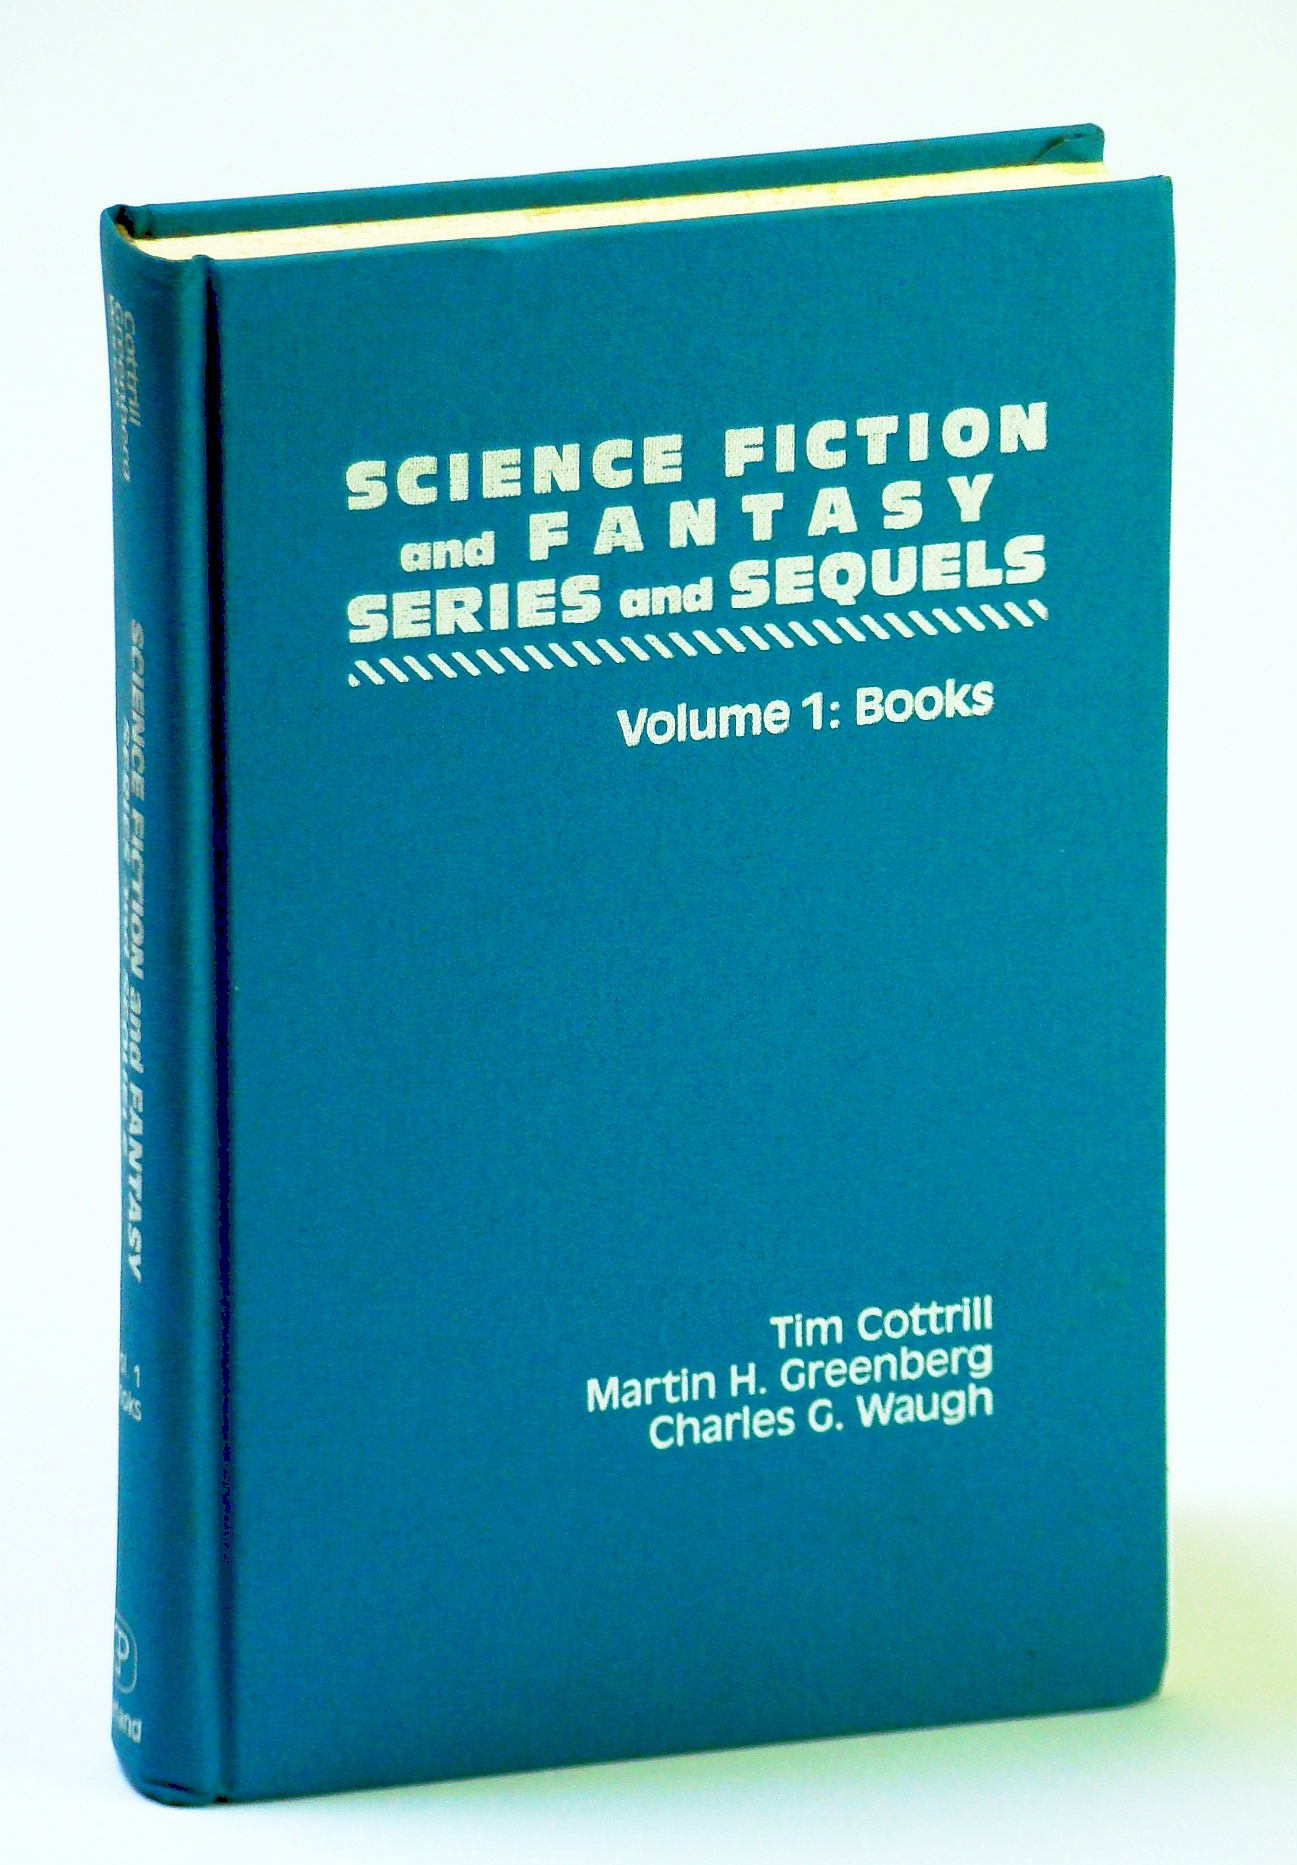 Science Fiction and Fantasy Series and Sequels: A Bibliography, Volume 1 (One / I) - Books - Cottrill, Tim; Greenberg, Martin H.; Waugh, Charles G.